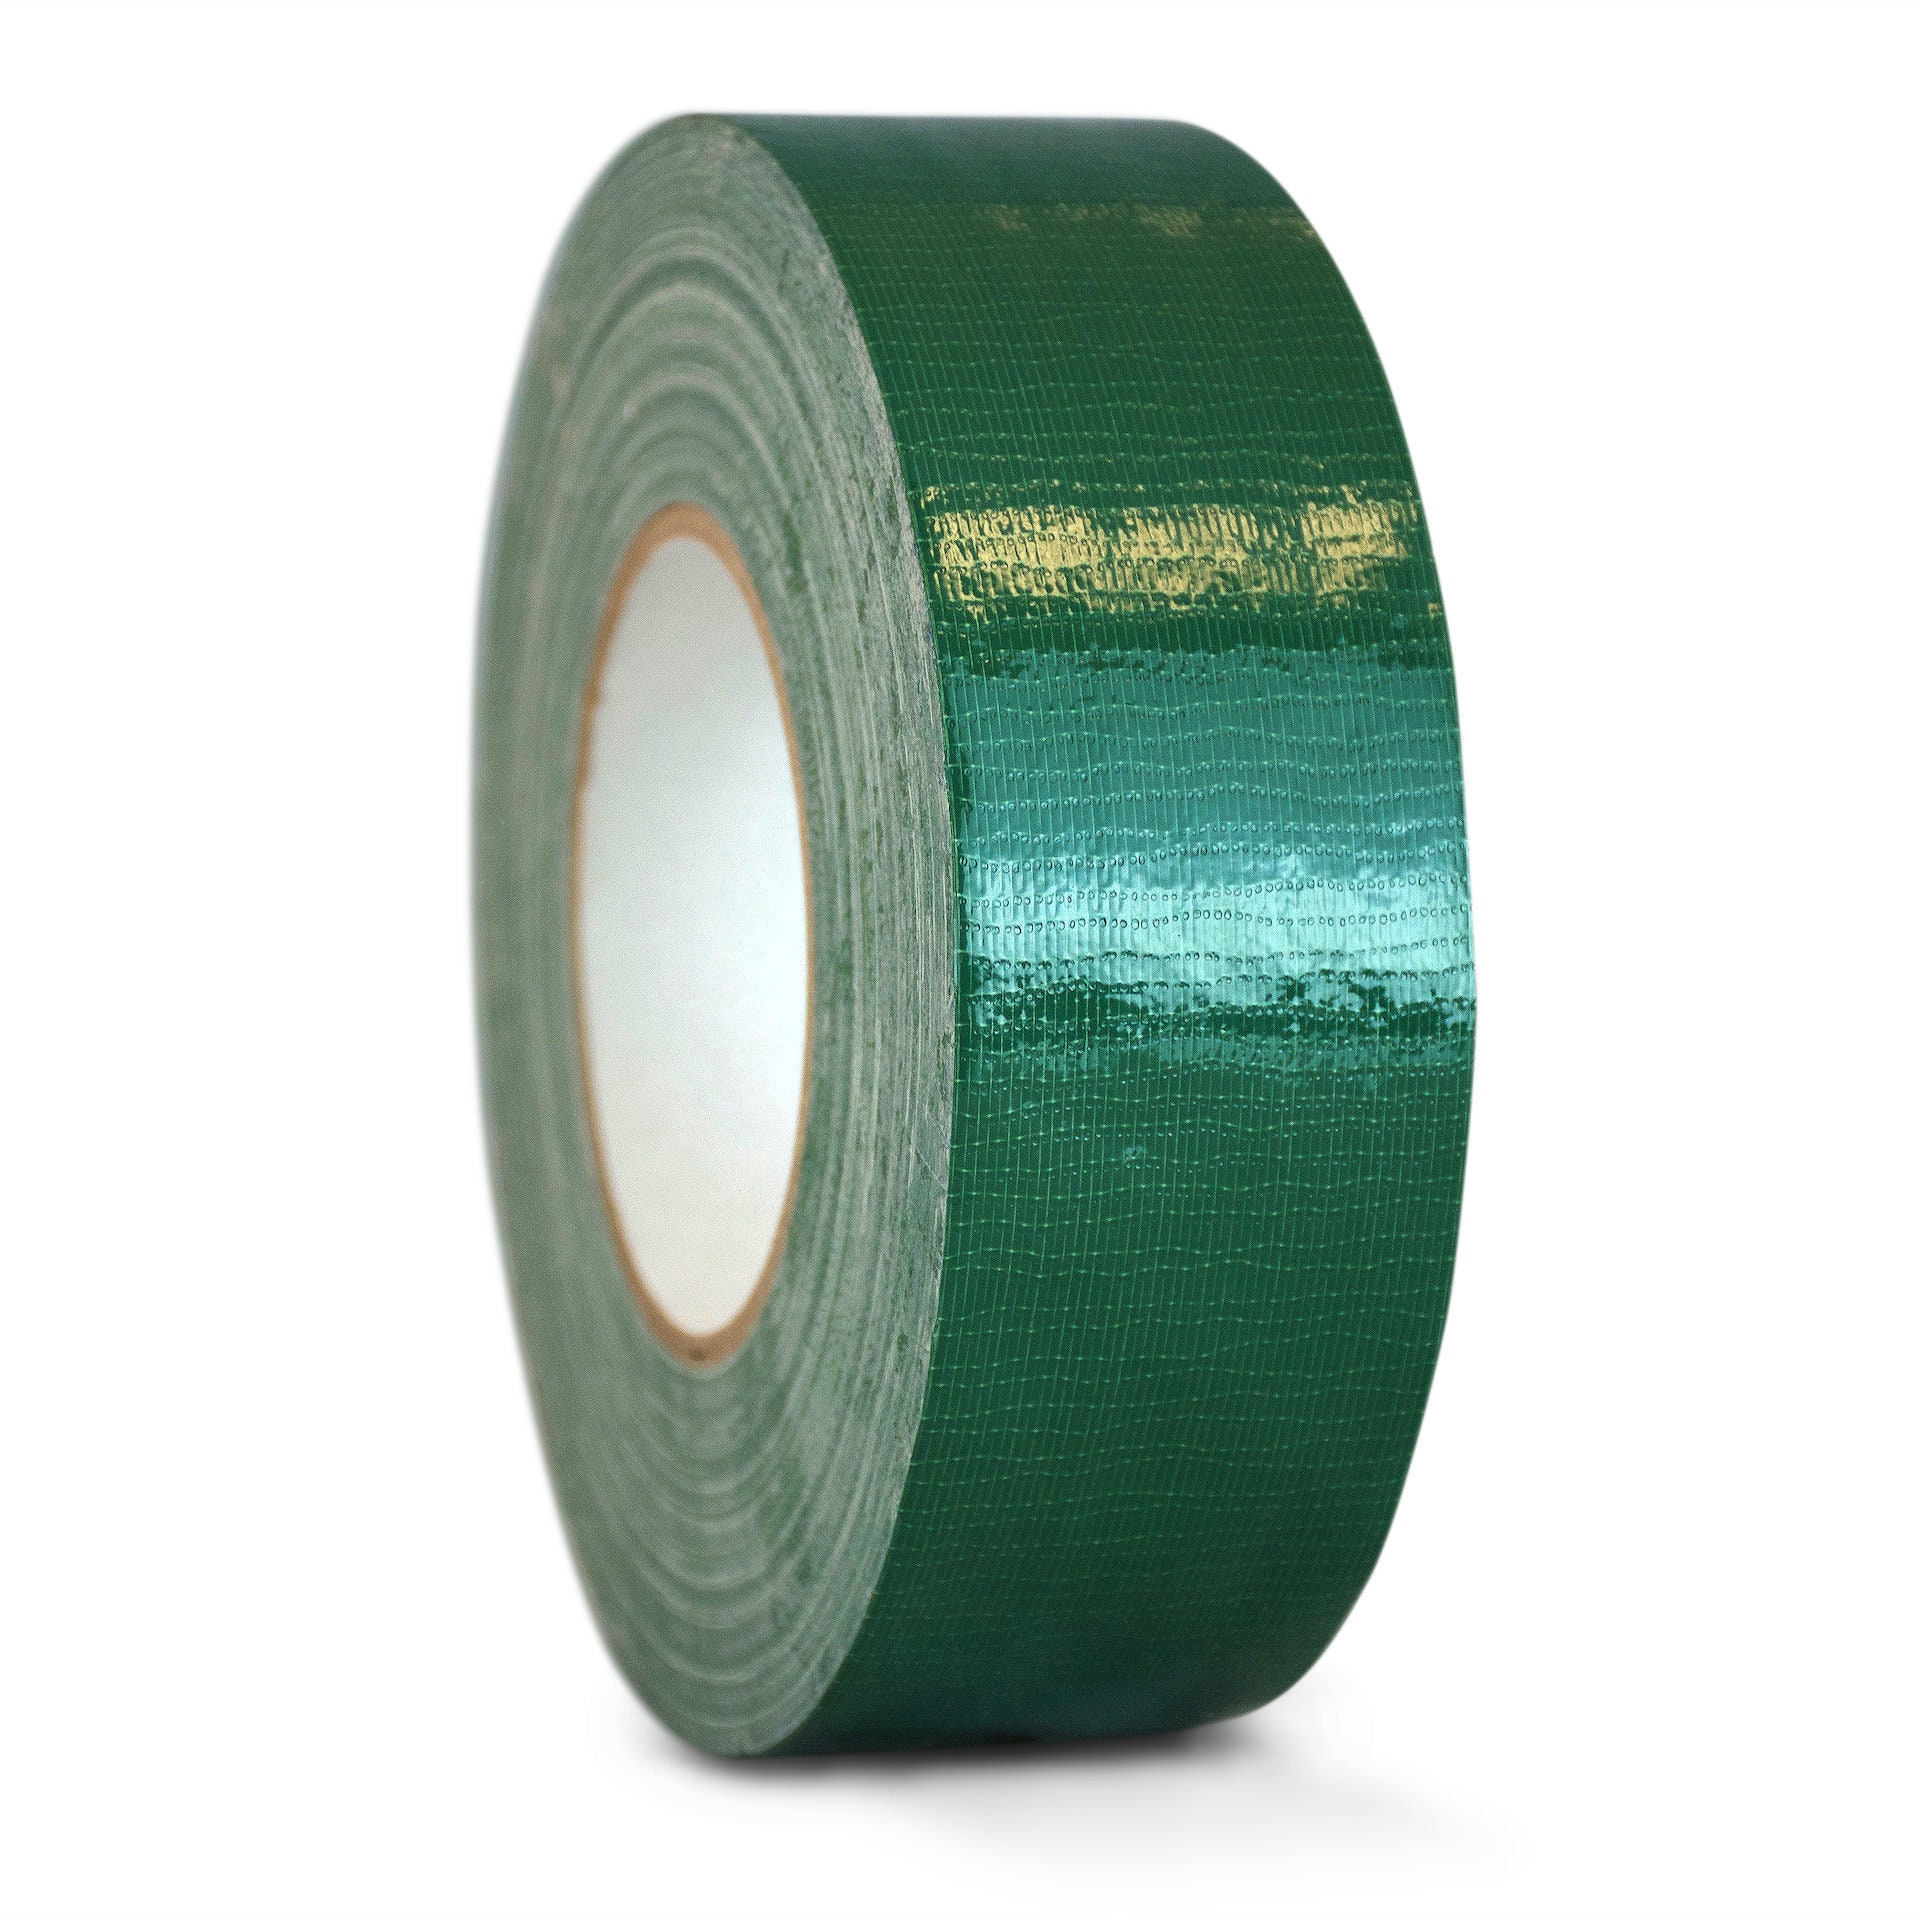 WOD DTC10 Advanced Strength Industrial Grade Dark Green Duct Tape, 2 inch x  60 yds. Waterproof, UV Resistant For Crafts & Home Improvement